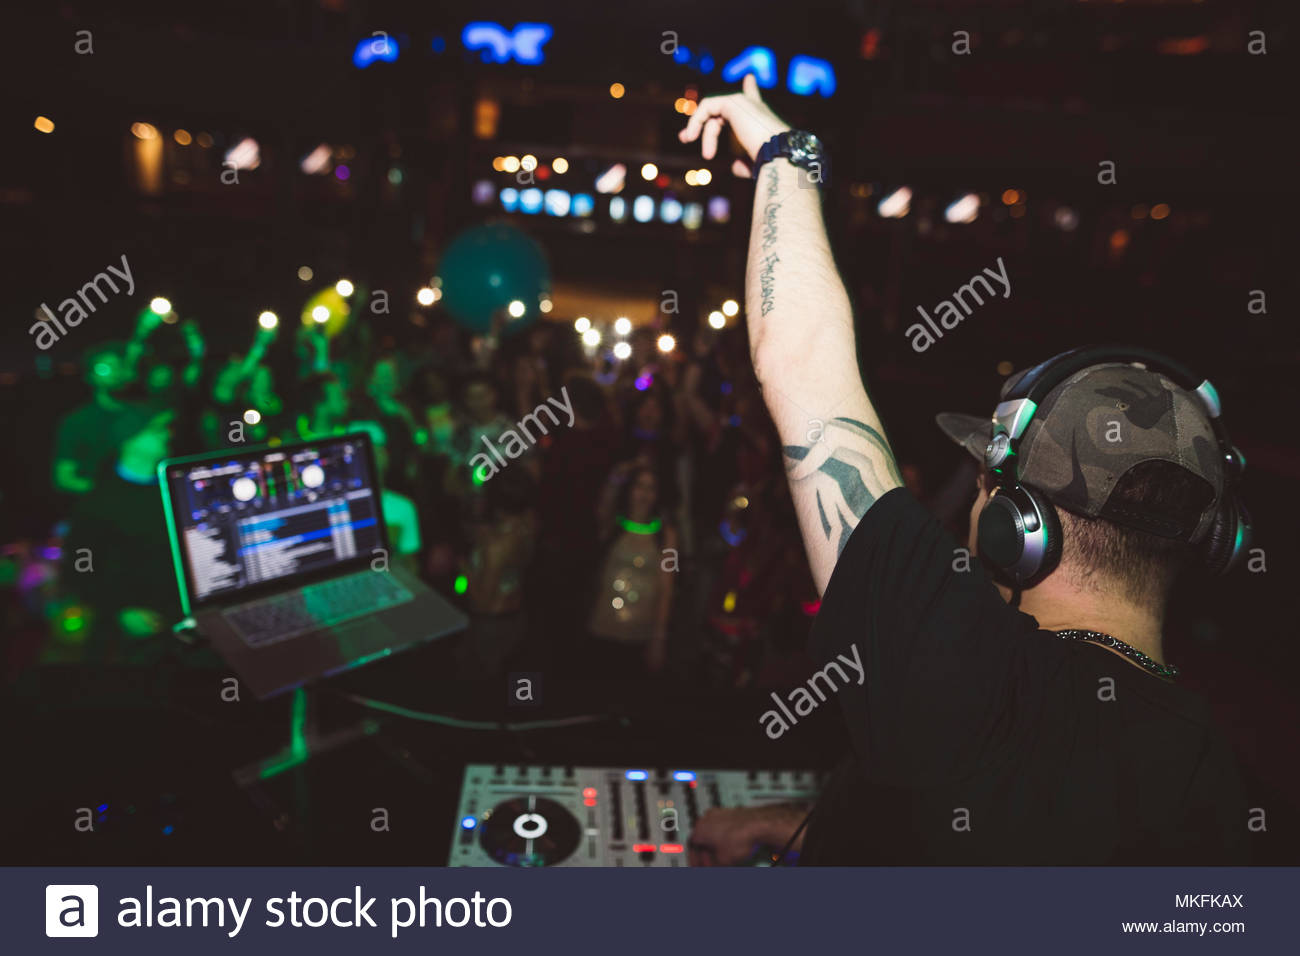 Enthusiastic DJ on stage gesturing to crowd in nightclub Stock Photo